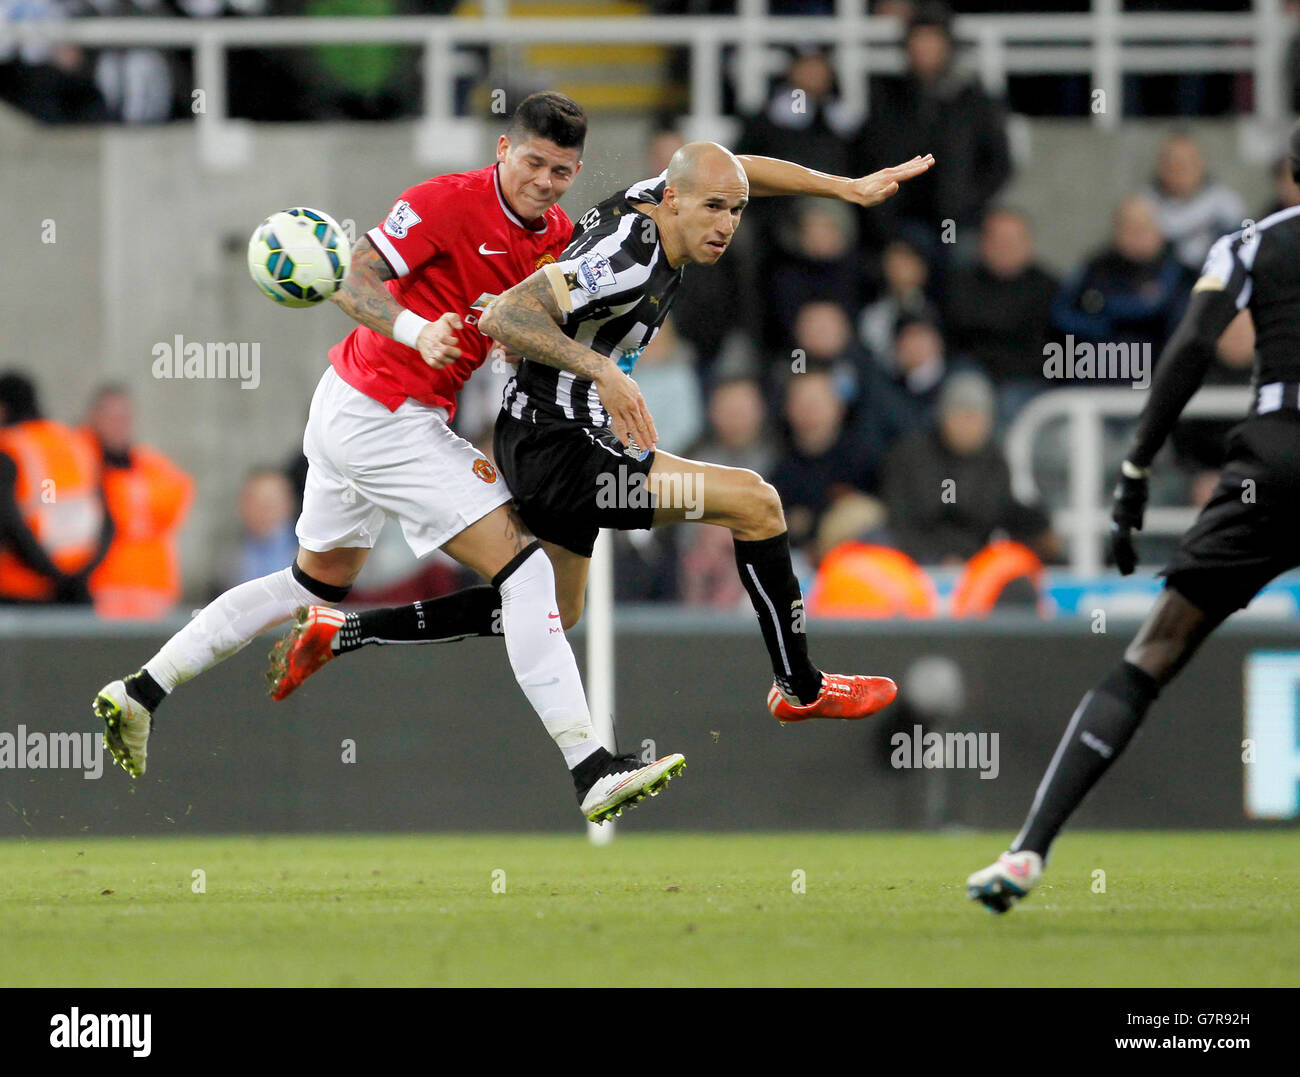 Manchester United's Marcos Rojo challenges Newcastle United's Gabriel Obertan during the Barclays Premier League match at St James' Park, Newcastle. Stock Photo